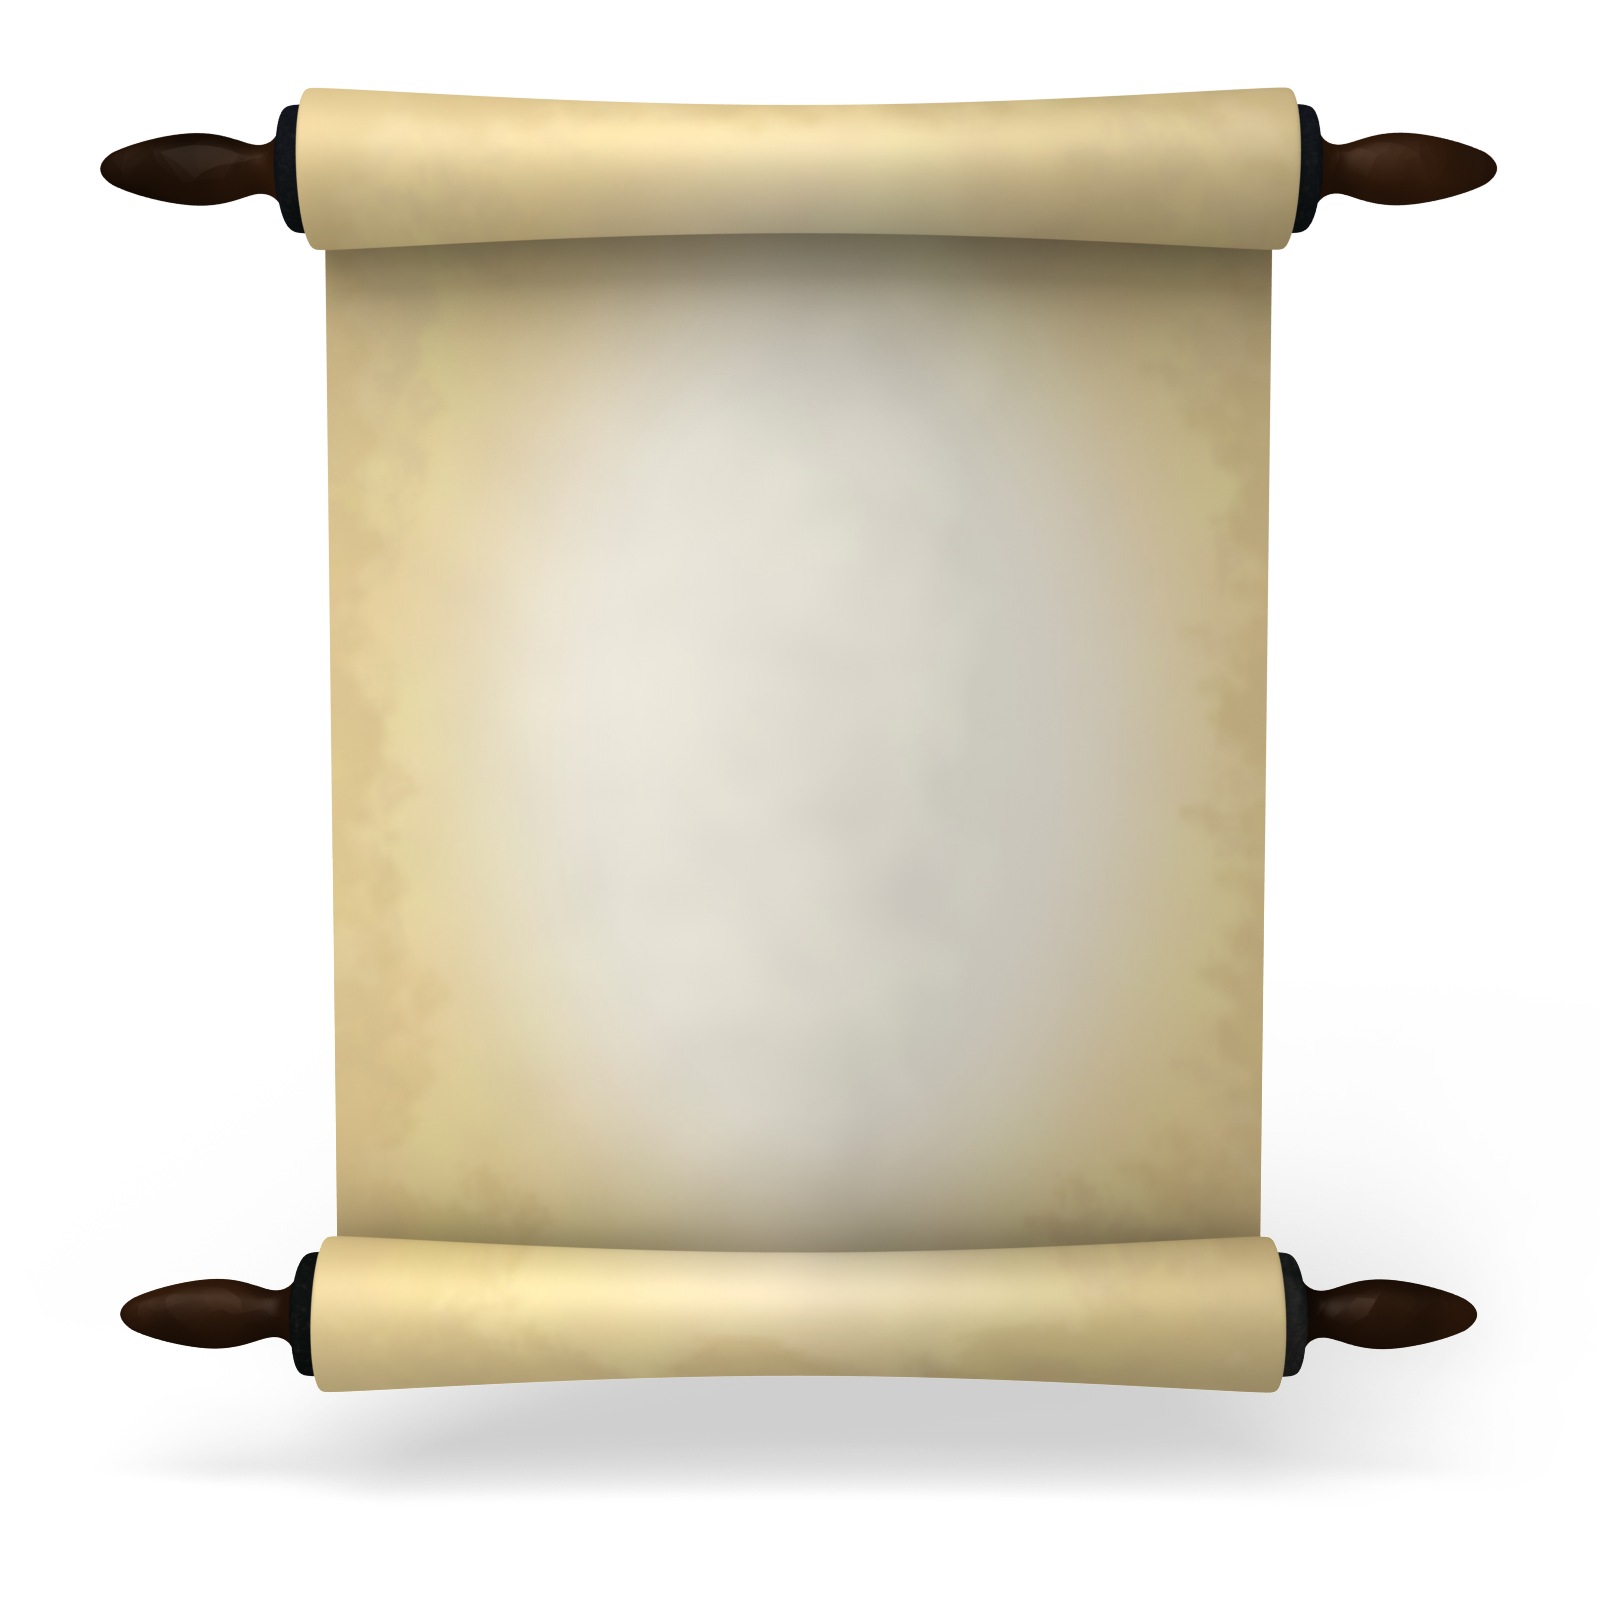 Ancient scroll paper best. Kite clipart old